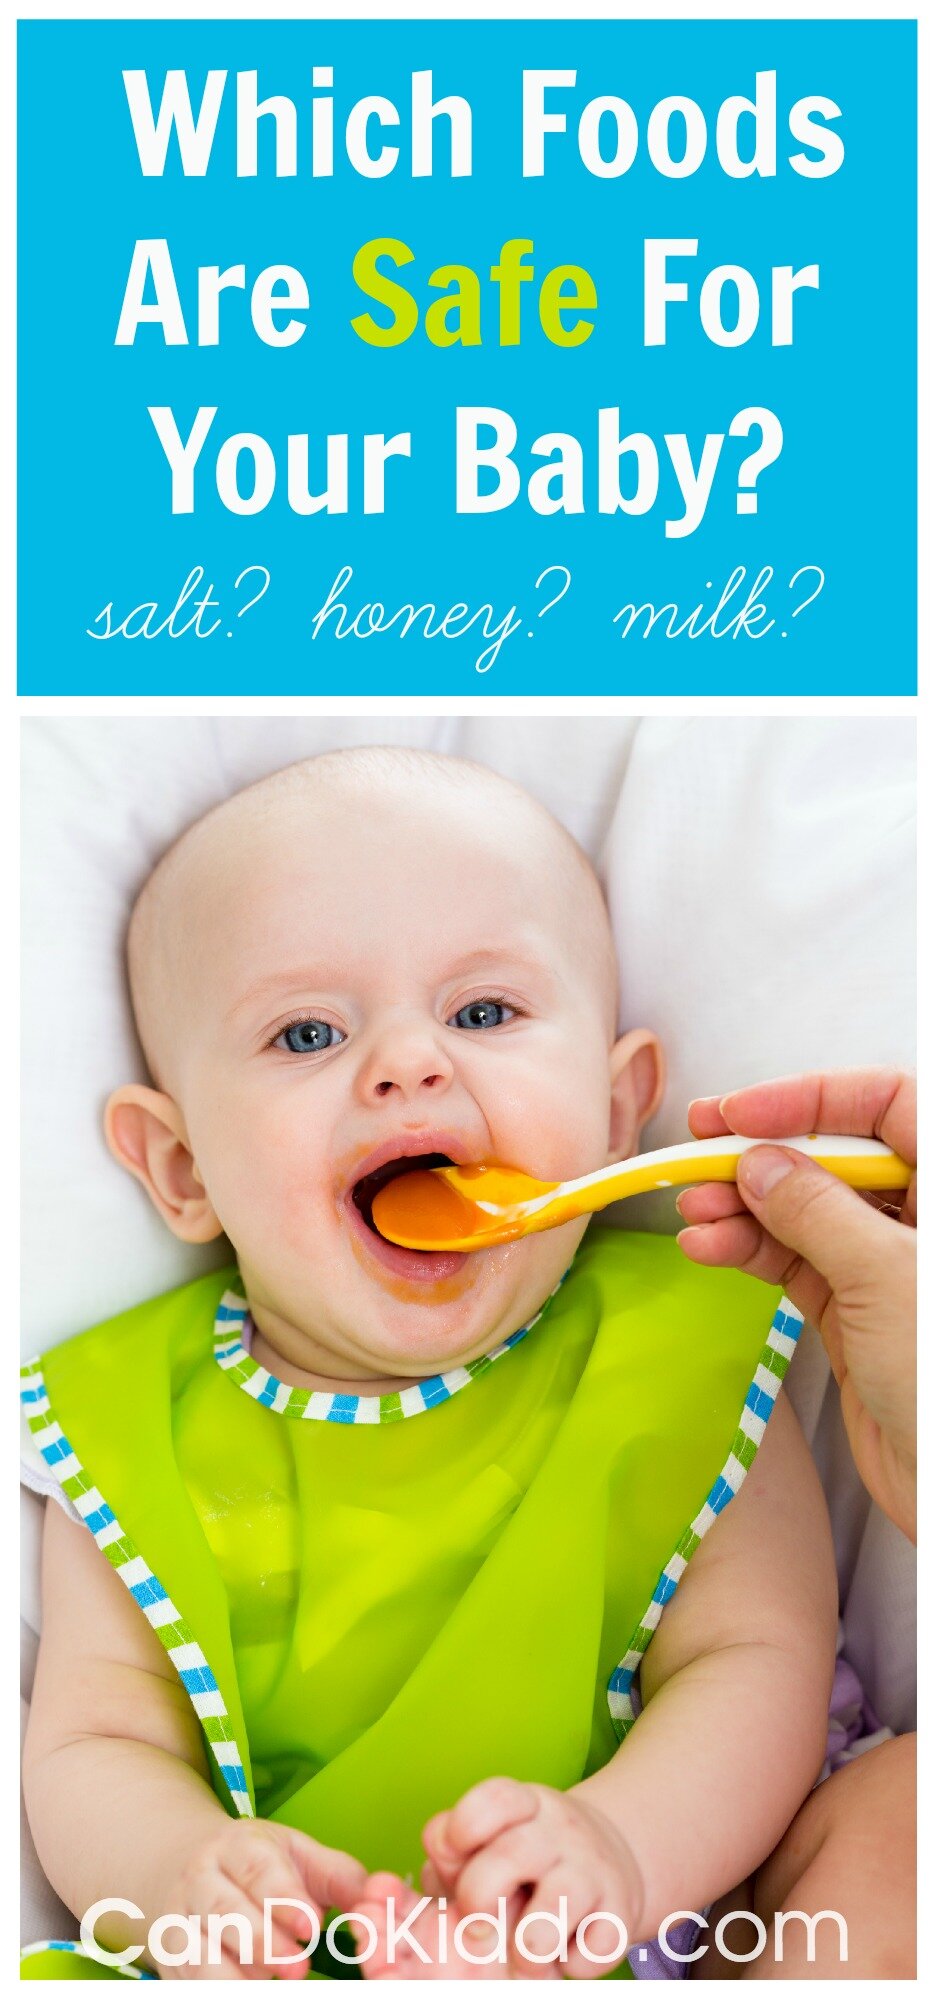 Feeding your baby: When to start with solid foods